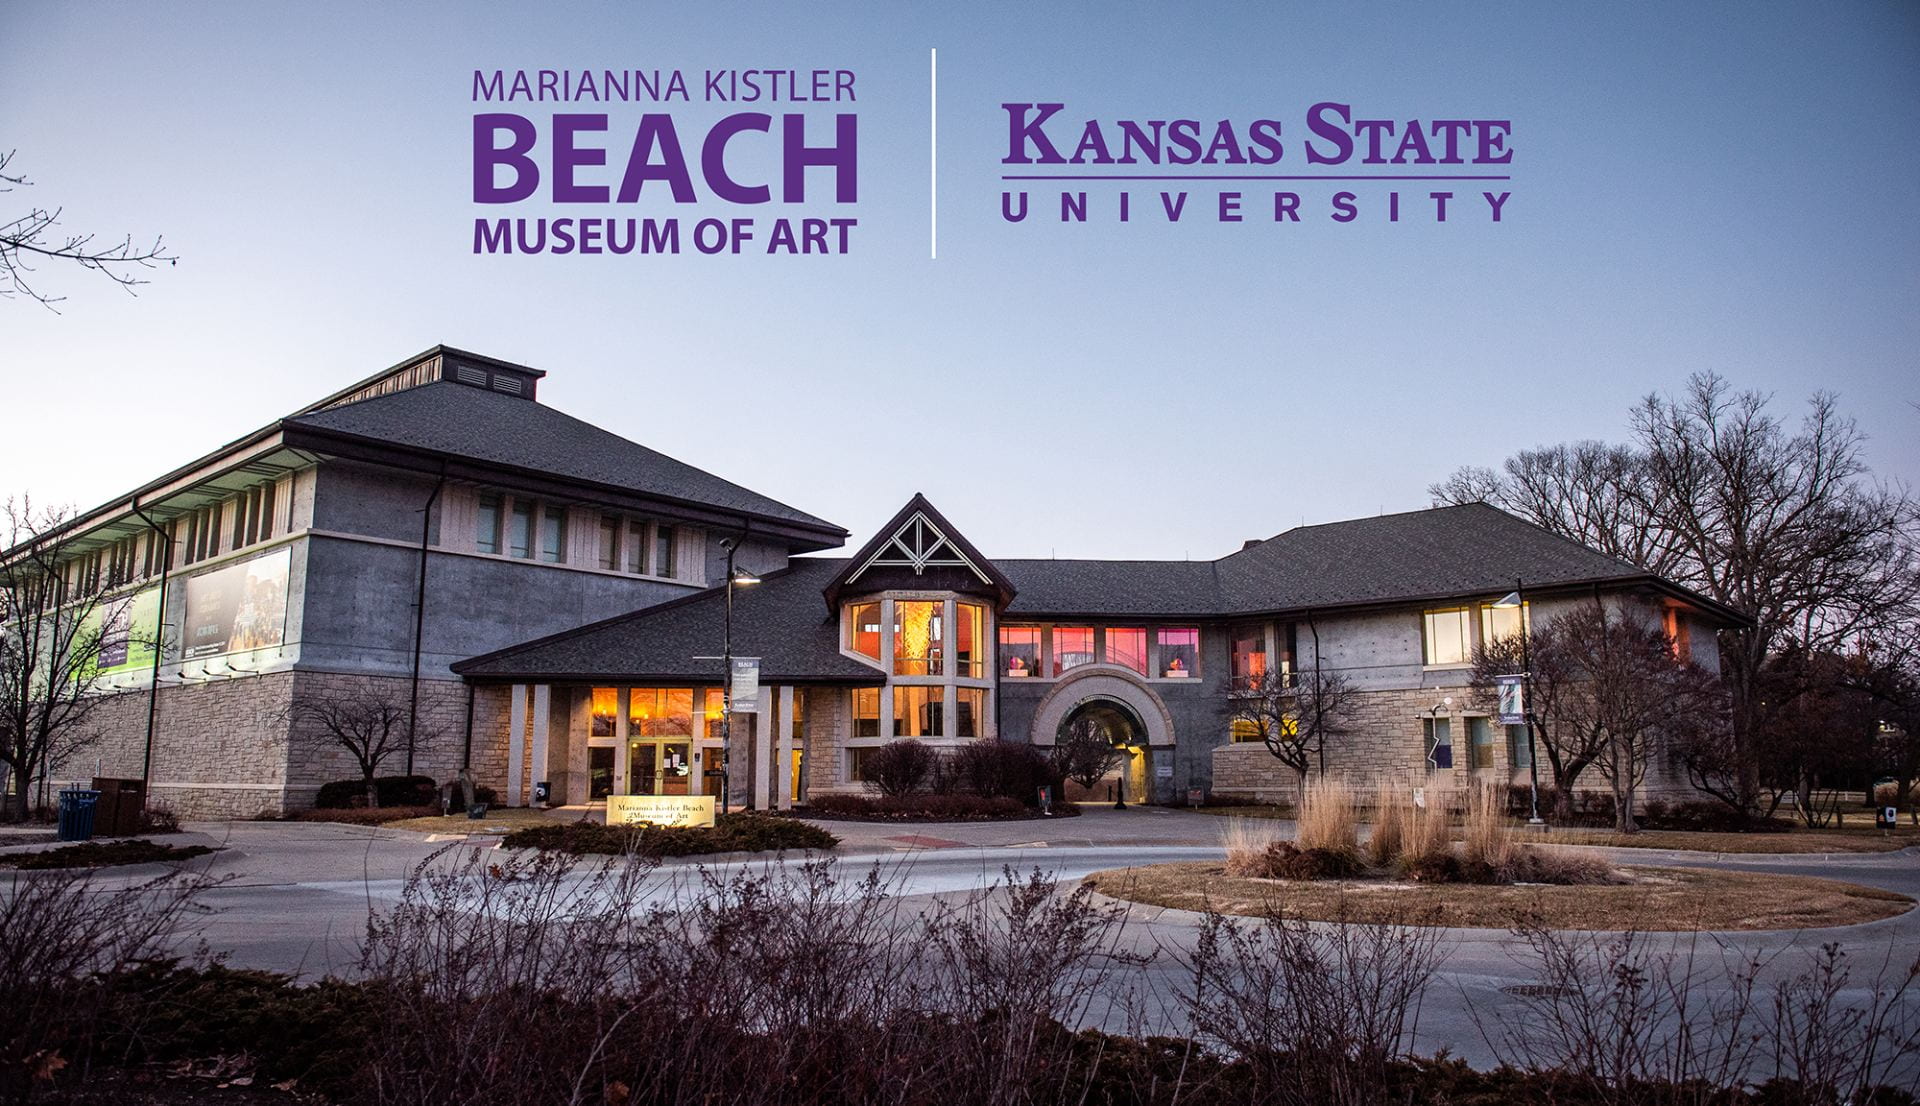 Beach Museum of Art exterior photo with the exhibition "Inside Out" featuring artworks from the museum's collection in colorfully lighted windows.